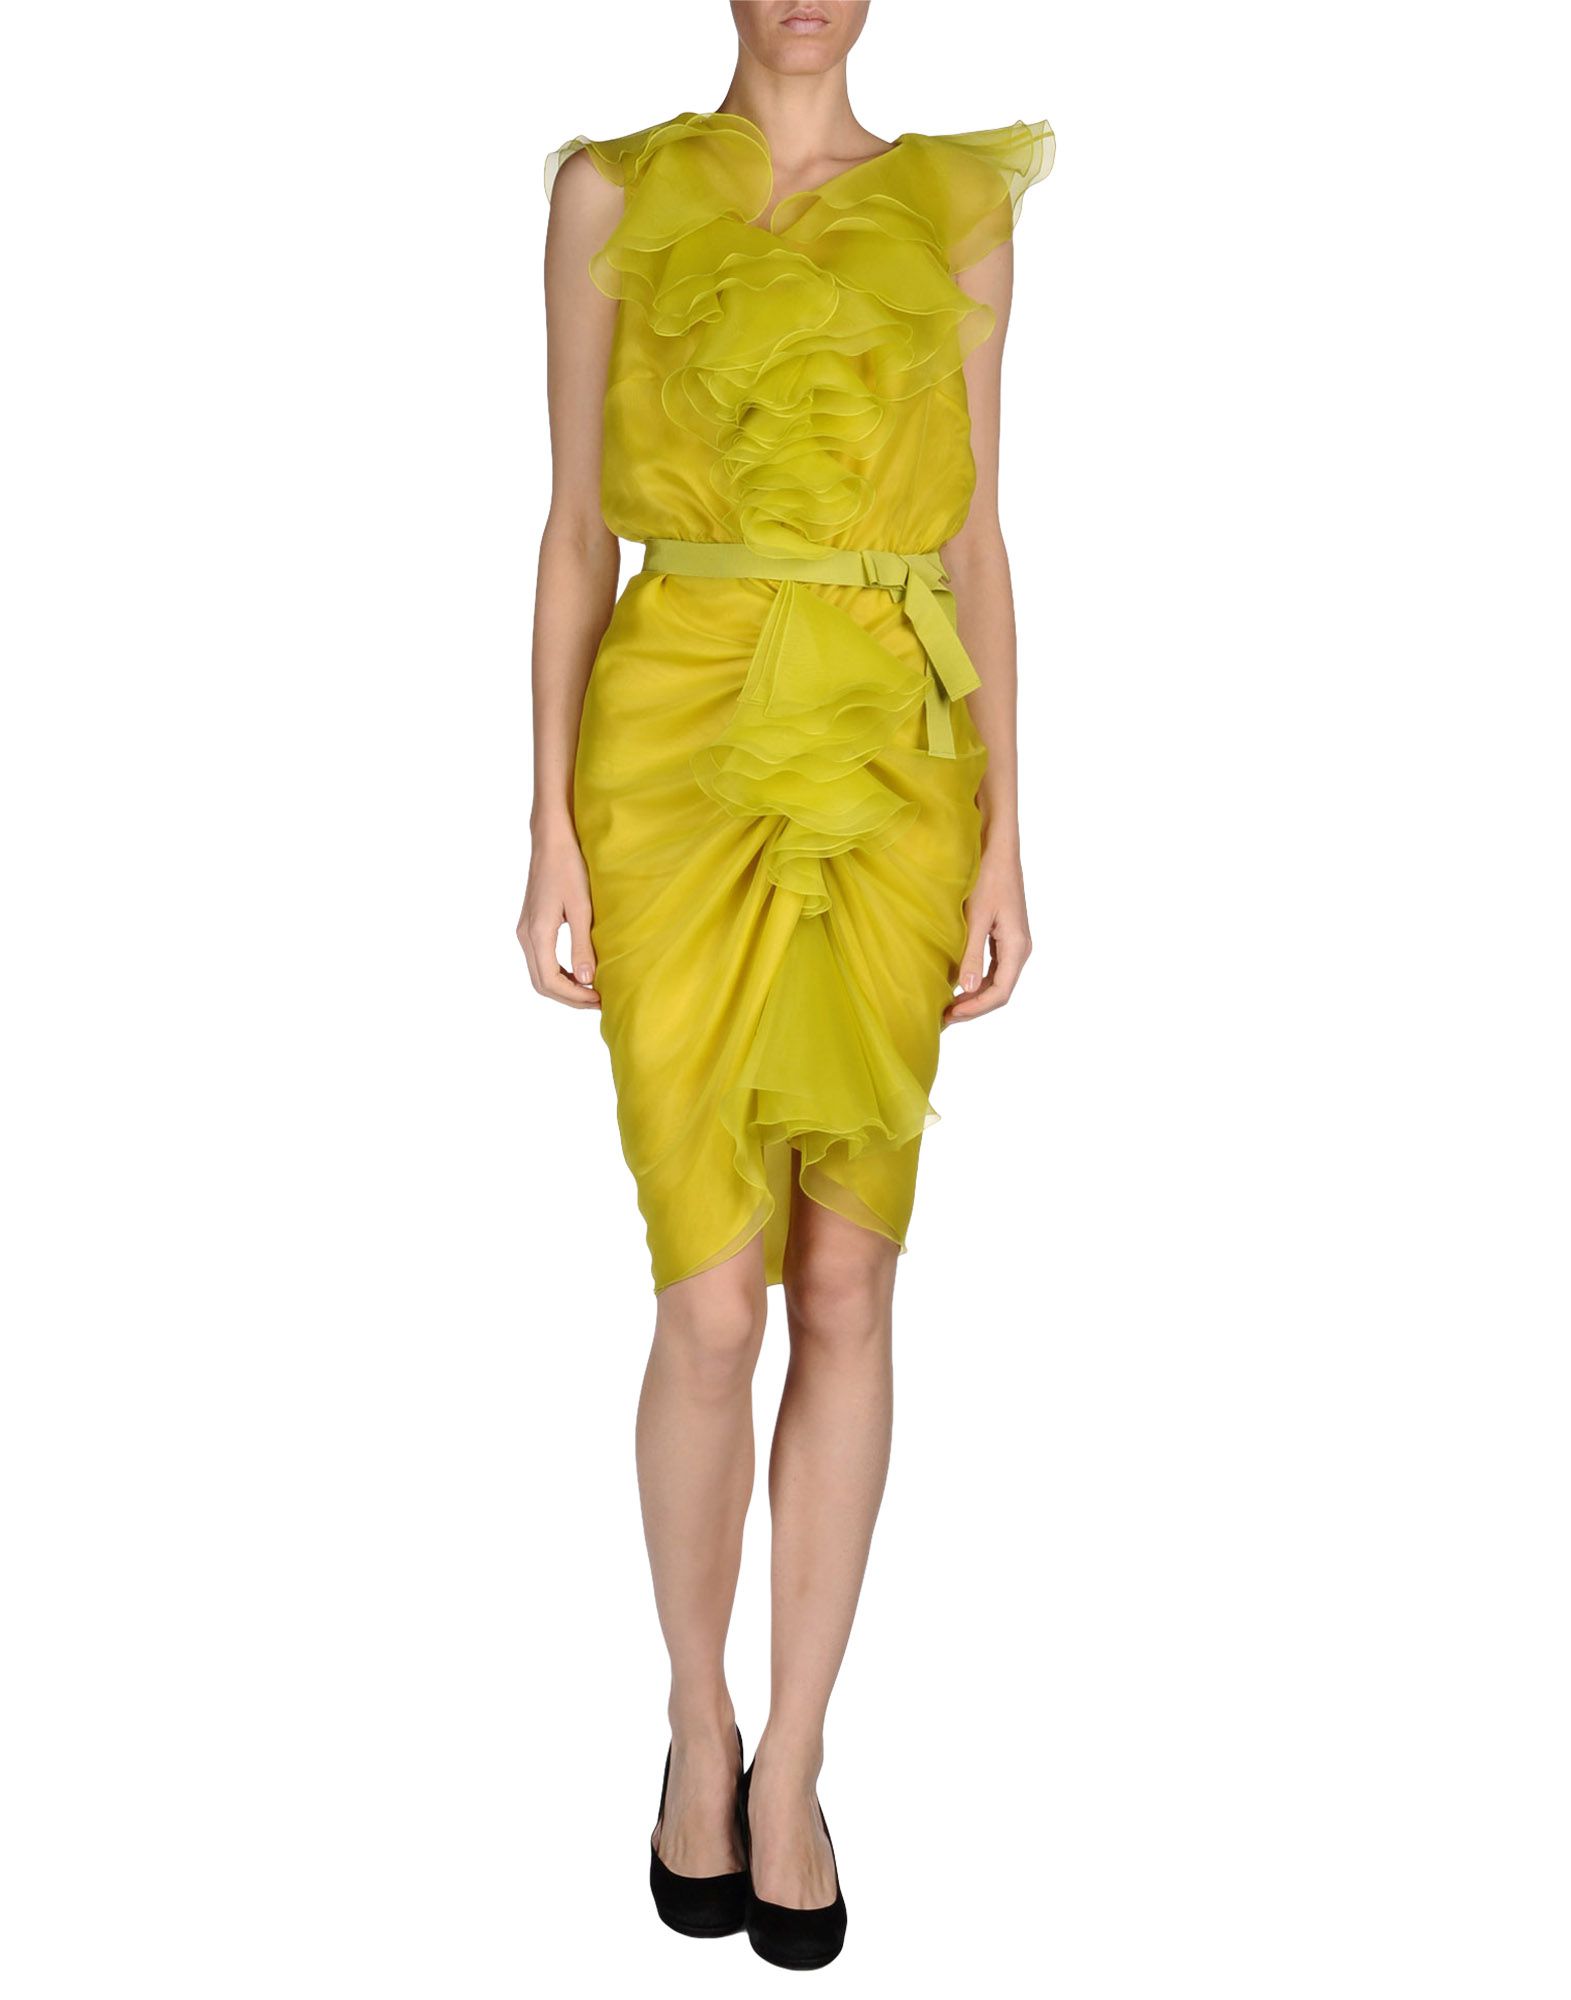 Boutique Moschino Kneelength Dress in Acid Green (Yellow) - Lyst